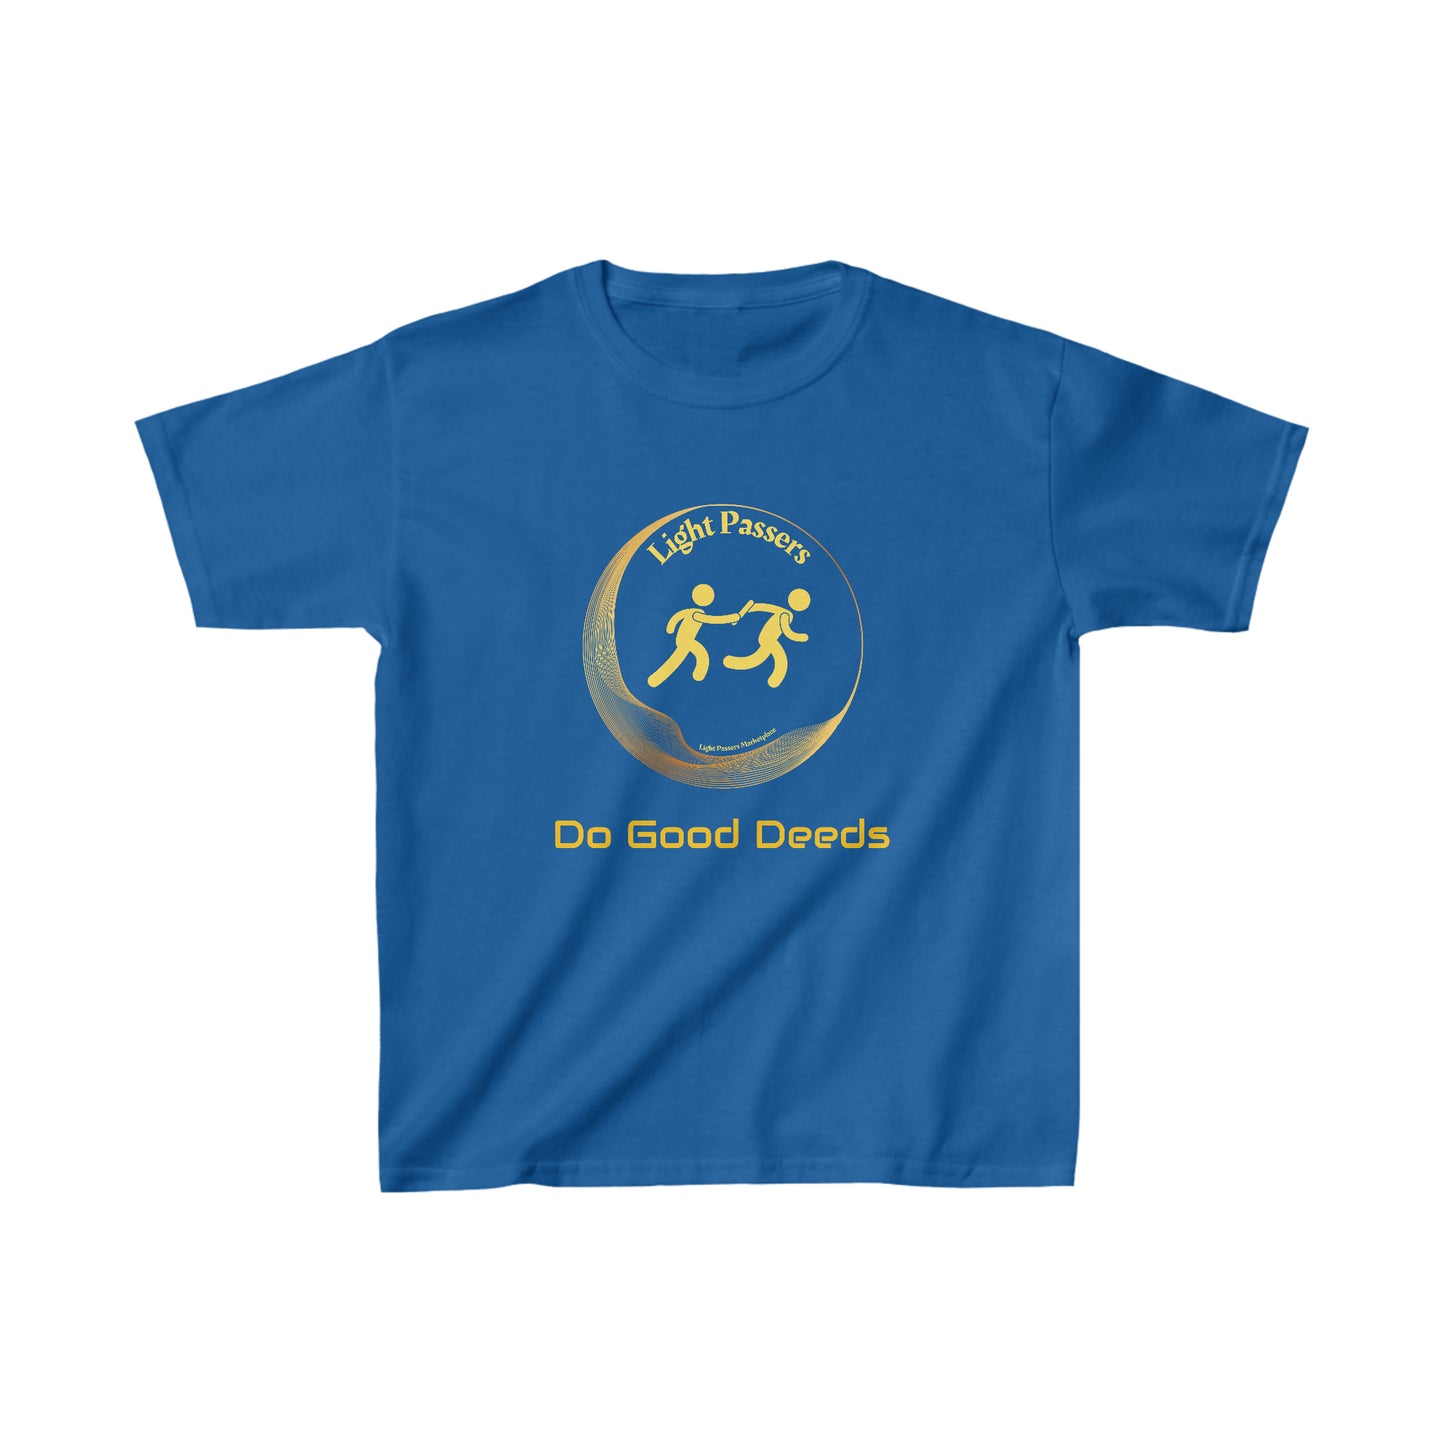 Light Passers Marketplace Light Passers Relay Do Good Deeds Youth Cotton™ T-shirt Simple Messages, Mental Health, Fitness